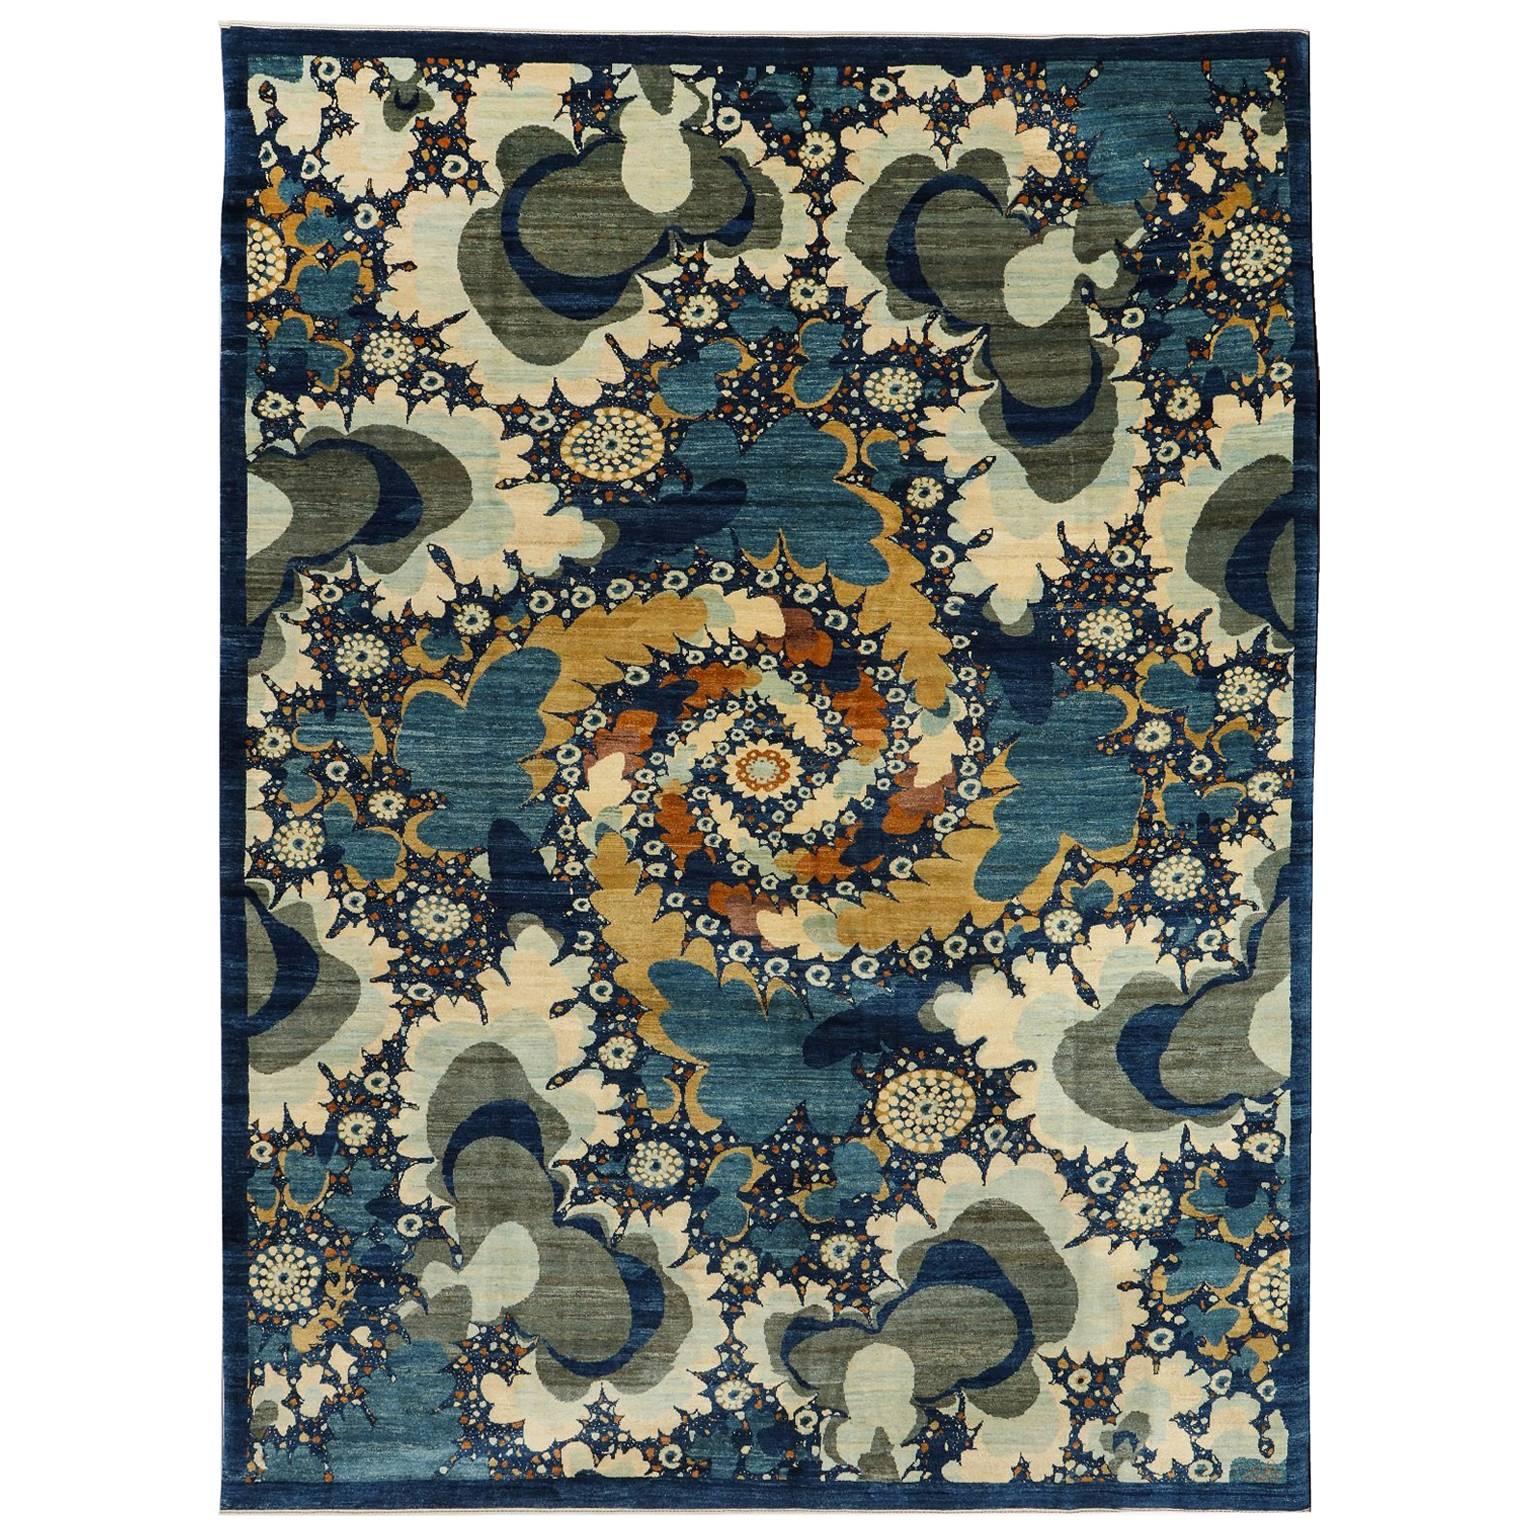 Orley Shabahang Signature "Nocturne" Persian Carpet